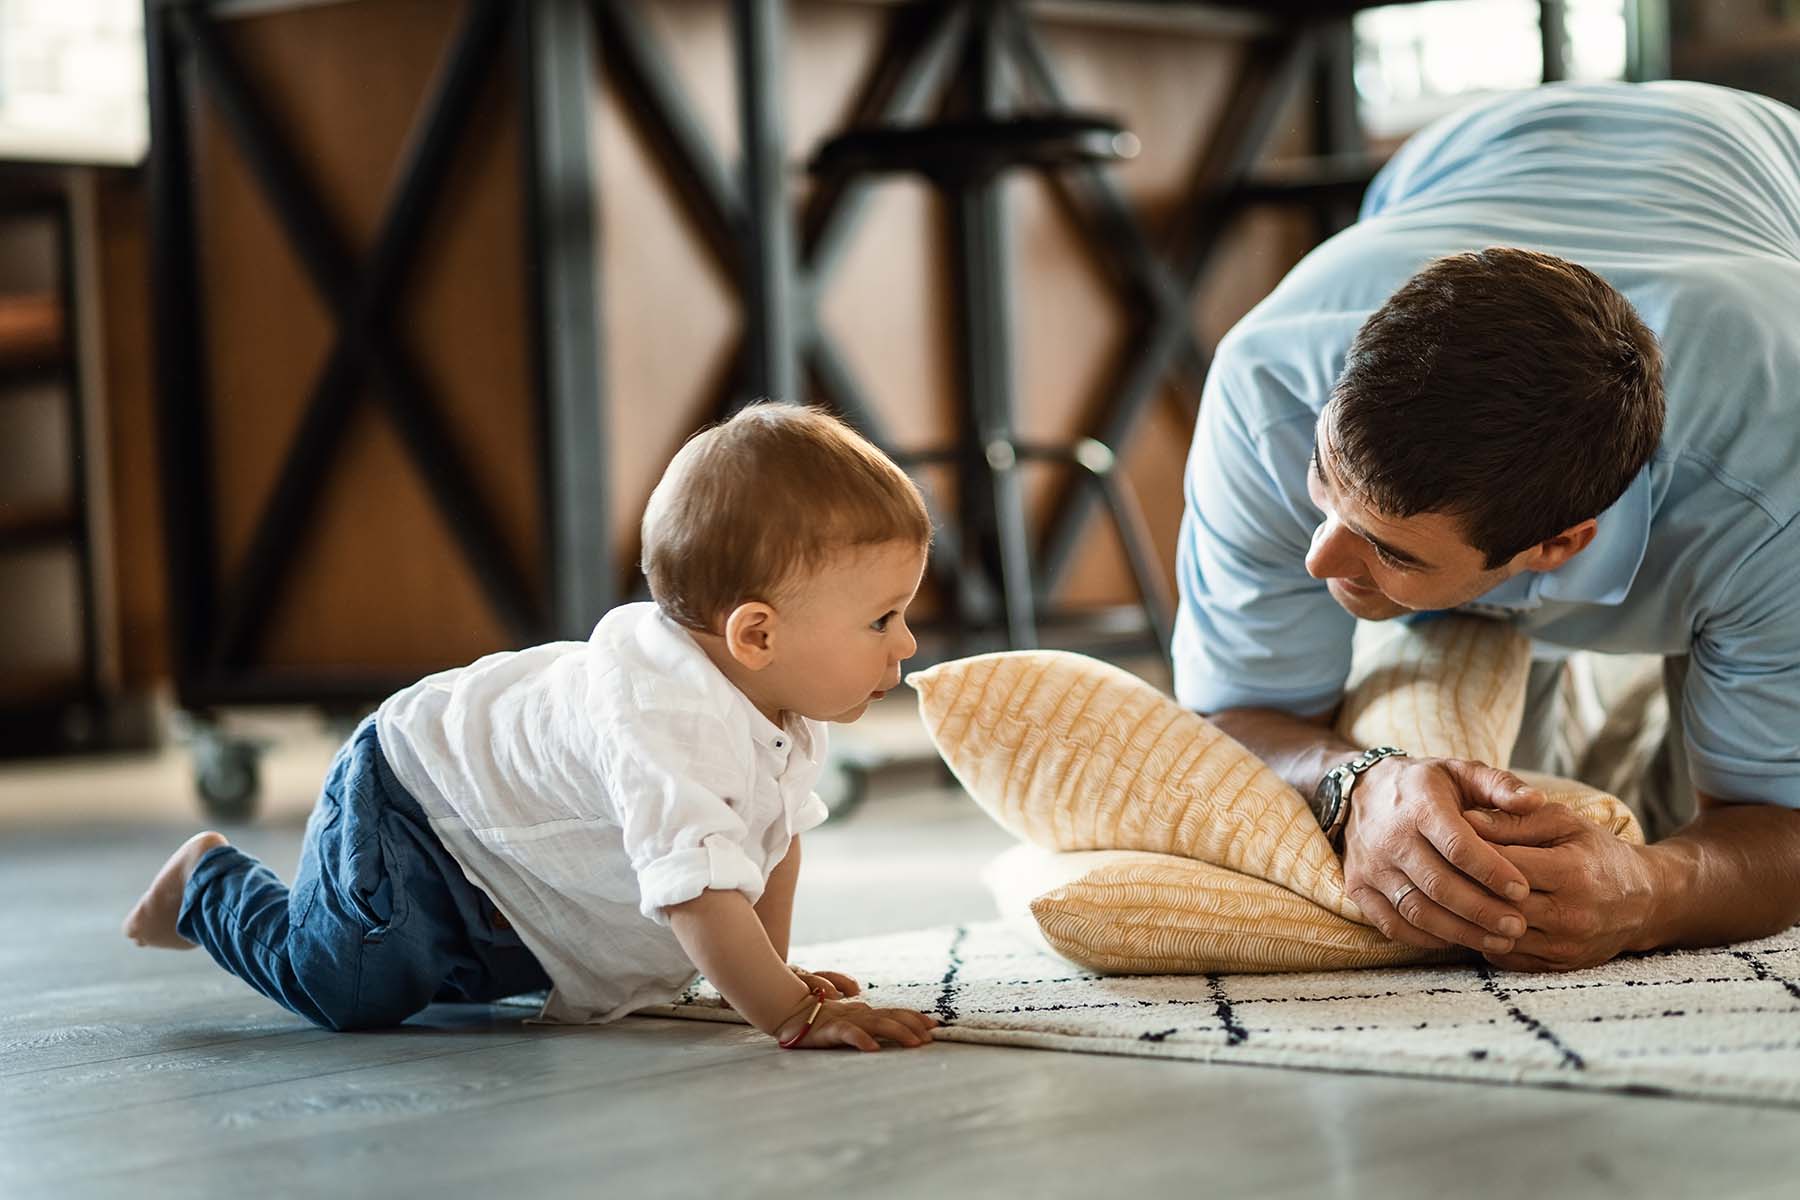 Well dressed toddler crawls to Dad who is crouched on floor at baby's level.